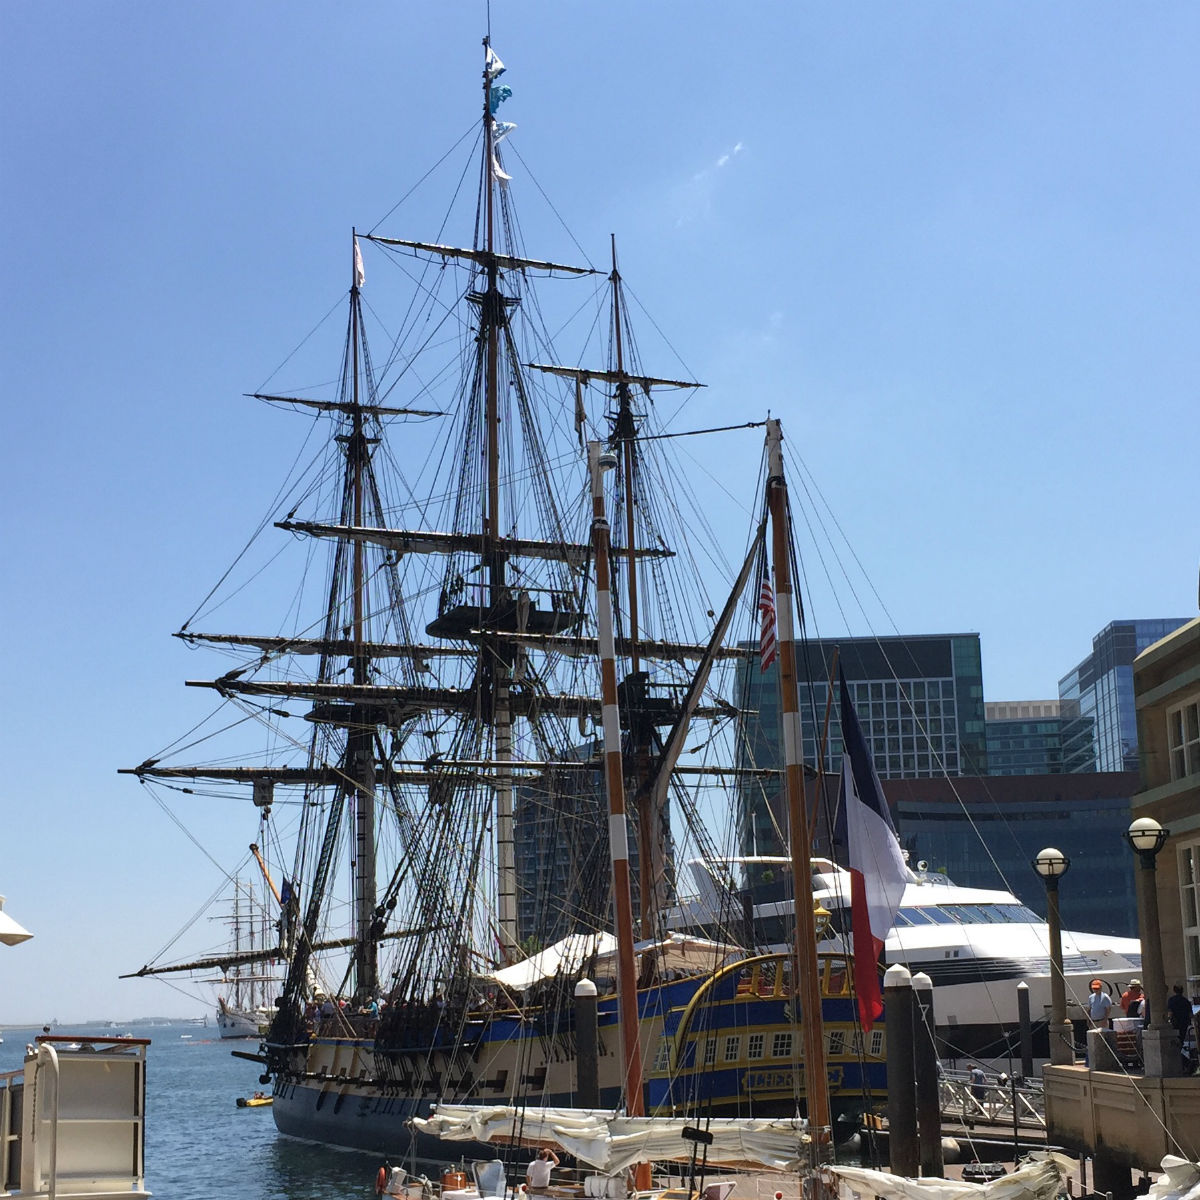 The Hermione in Rowes Wharf on July 11-12 / Photo by Shaula Clark